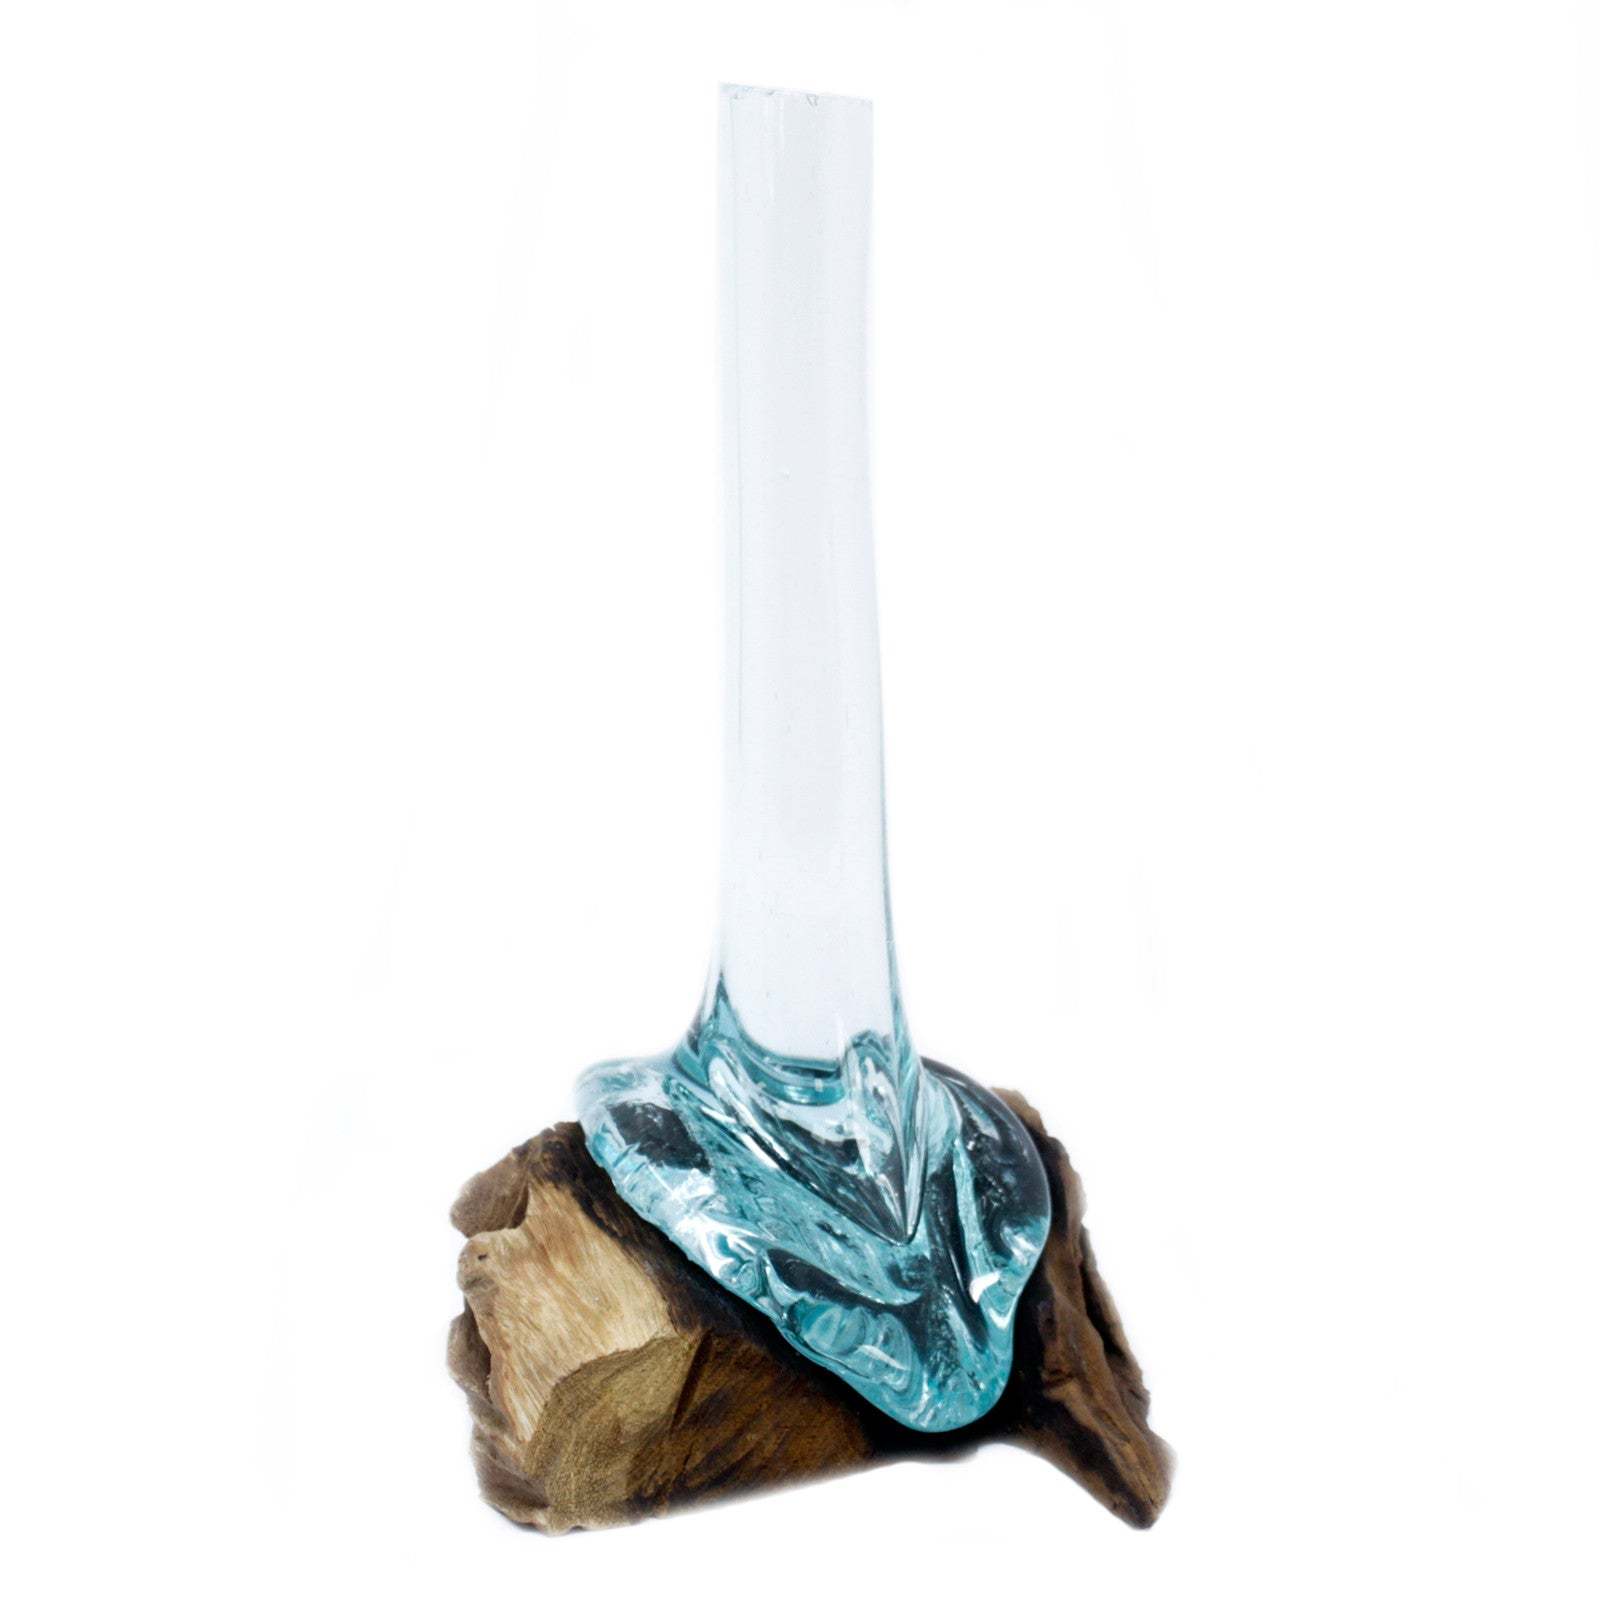 Molton Glass Vase On Wooden Stand - $48.99